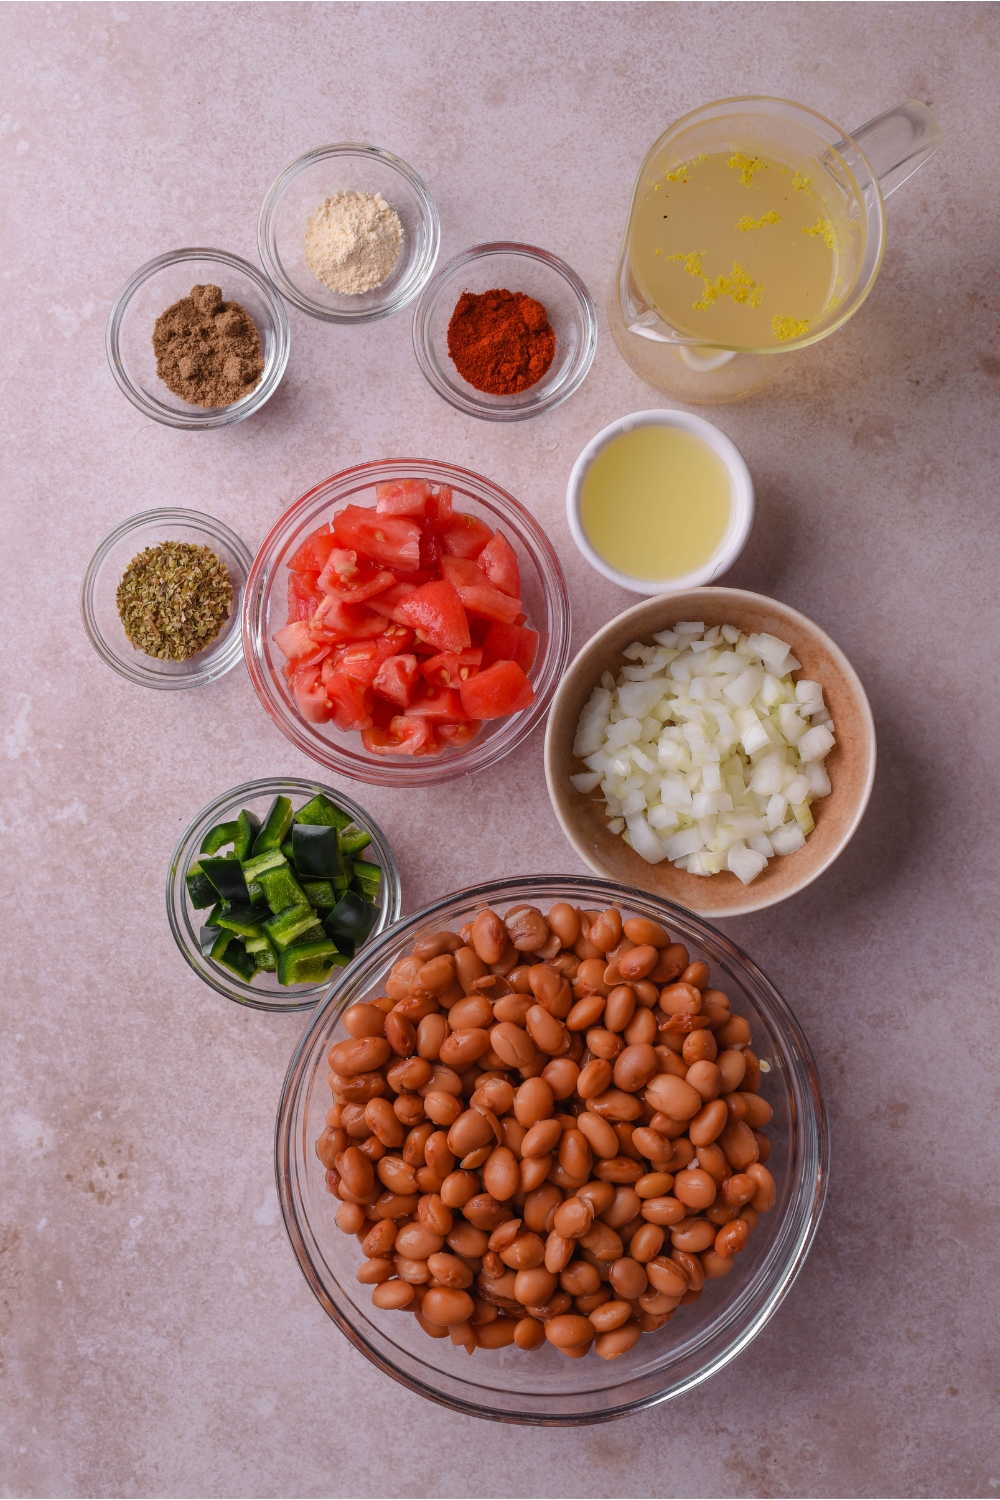 An assortment of ingredients including bowls of pinto beans, broth, diced tomatoes, diced onions, peppers, and spices.